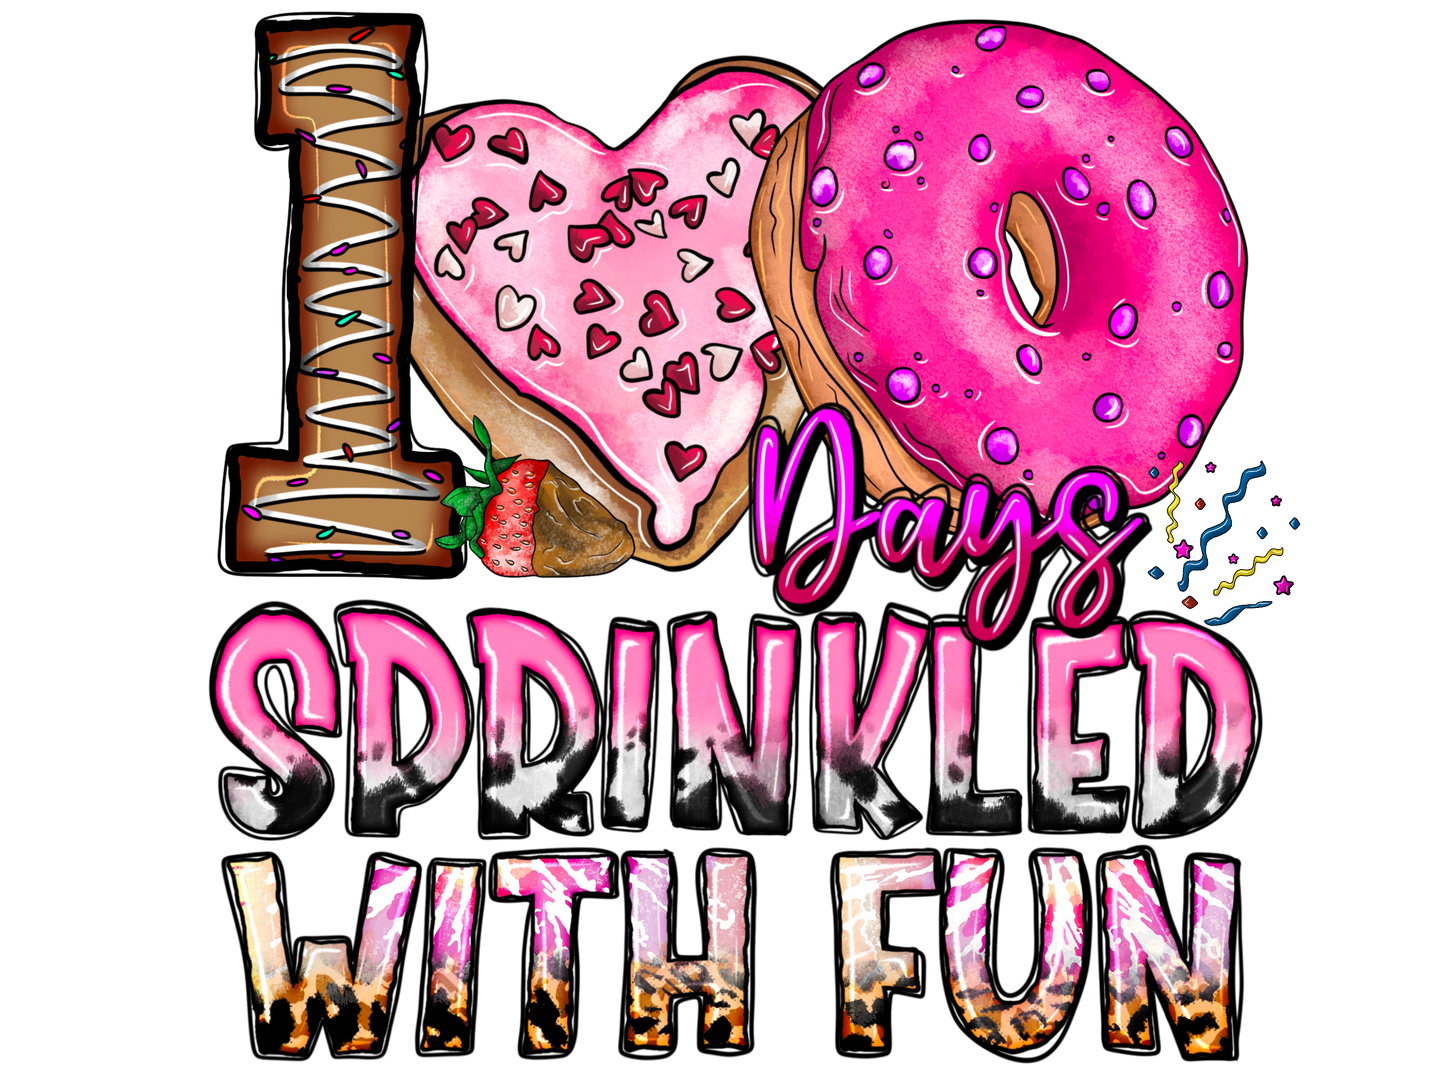 100 days Sprinkled with Fun